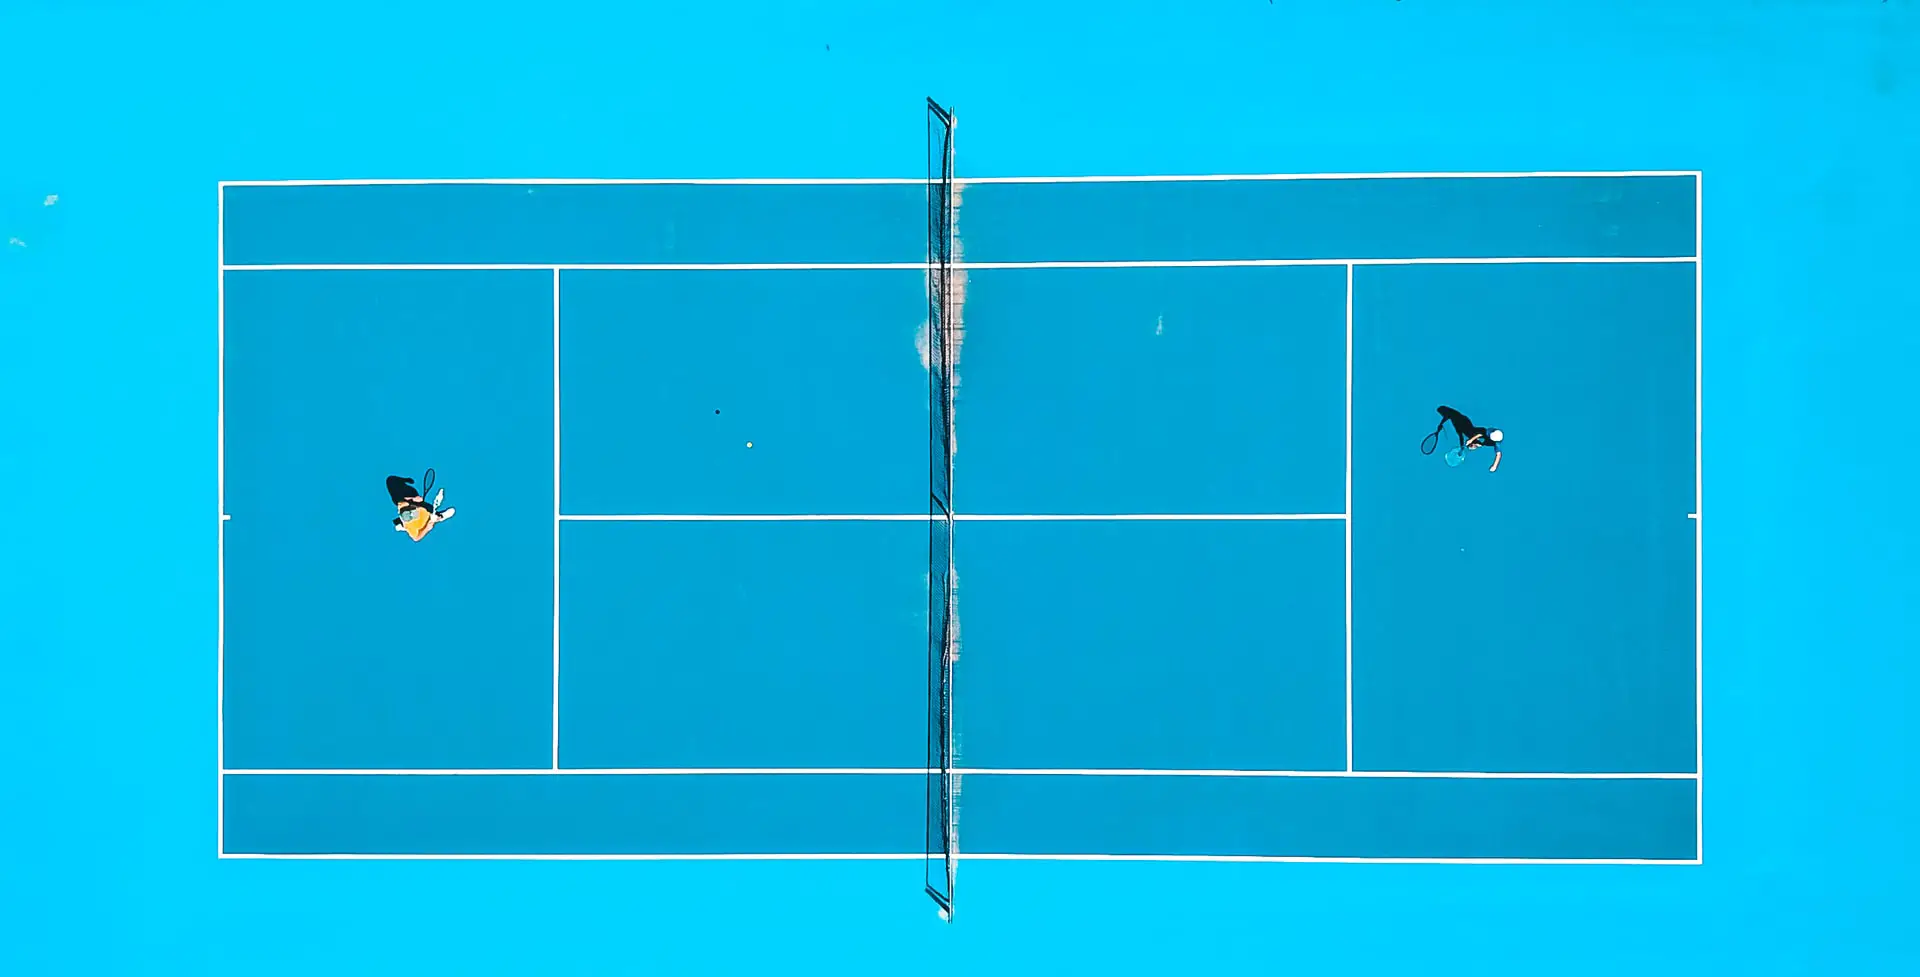 A blue tennis court from bird perspective with two players playing down the line